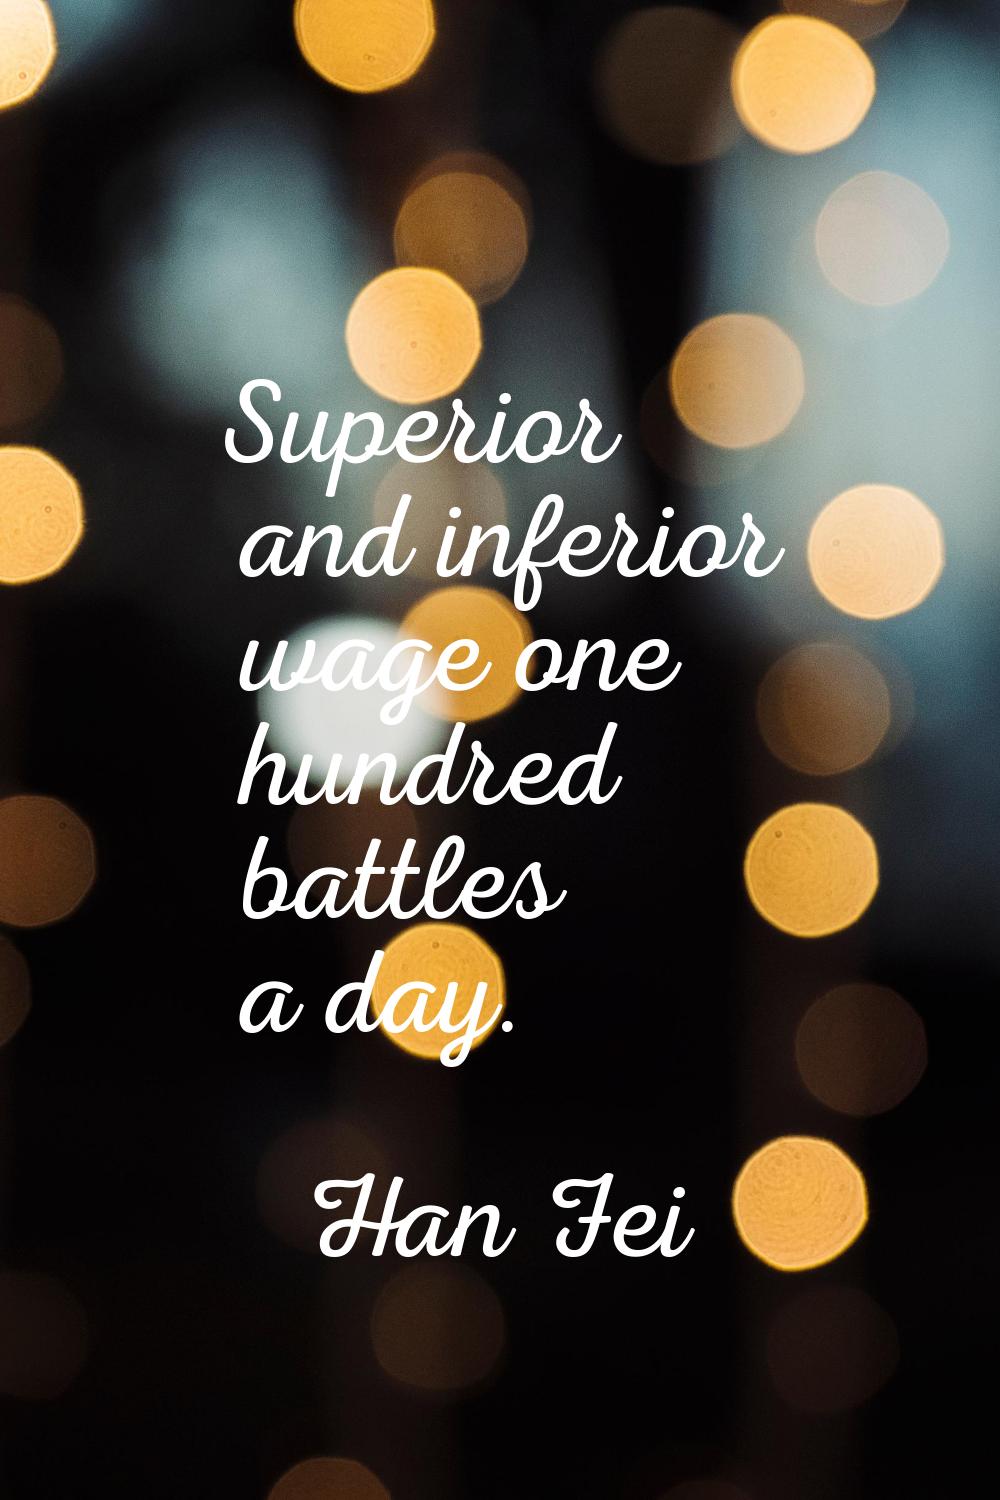 Superior and inferior wage one hundred battles a day.